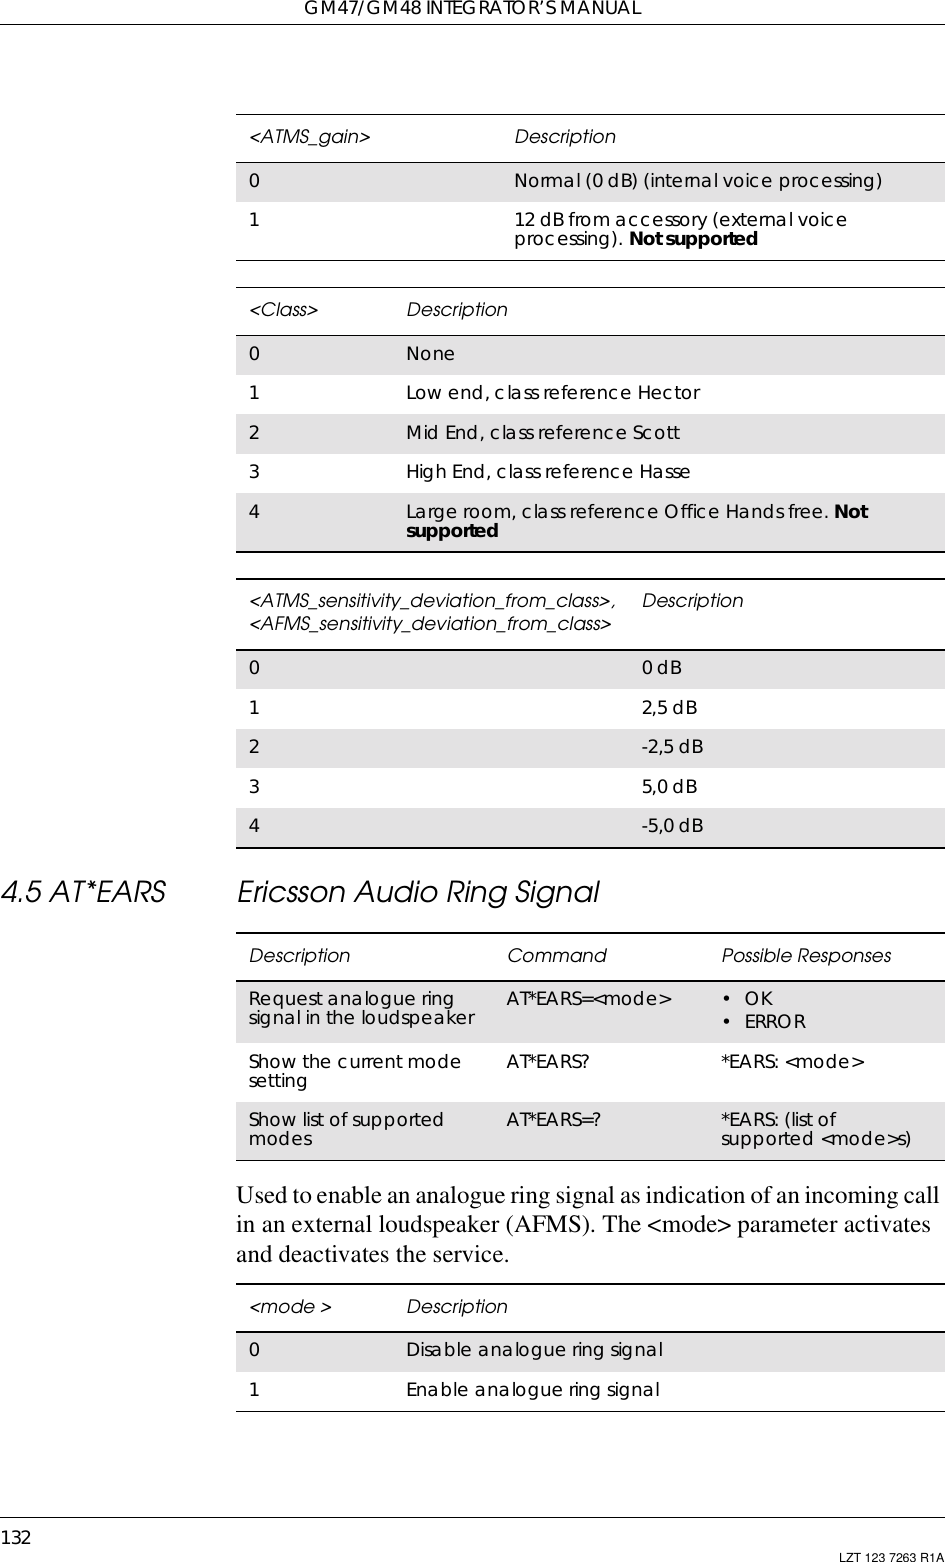 GM47/GM48 INTEGRATOR’S MANUAL132 LZT 123 7263 R1A4.5 AT*EARS Ericsson Audio Ring SignalUsed to enable an analogue ring signal as indication of an incoming callin an external loudspeaker (AFMS). The &lt;mode&gt; parameter activatesand deactivates the service.&lt;ATMS_gain&gt; Description0Normal (0 dB) (internal voice processing)112 dB from accessory (external voiceprocessing). Not supported&lt;Class&gt; Description0None1Low end, class reference Hector2Mid End, class reference Scott3High End, class reference Hasse4Large room, class reference Office Hands free. Notsupported&lt;ATMS_sensitivity_deviation_from_class&gt;,&lt;AFMS_sensitivity_deviation_from_class&gt; Description00dB12,5 dB2-2,5 dB35,0 dB4-5,0 dBDescription Command Possible ResponsesRequest analogue ringsignal in the loudspeaker AT*EARS=&lt;mode&gt; •OK•ERRORShow the current modesetting AT*EARS? *EARS: &lt;mode&gt;Show list of supportedmodes AT*EARS=? *EARS: (list ofsupported &lt;mode&gt;s)&lt;mode &gt; Description0Disable analogue ring signal1Enable analogue ring signal